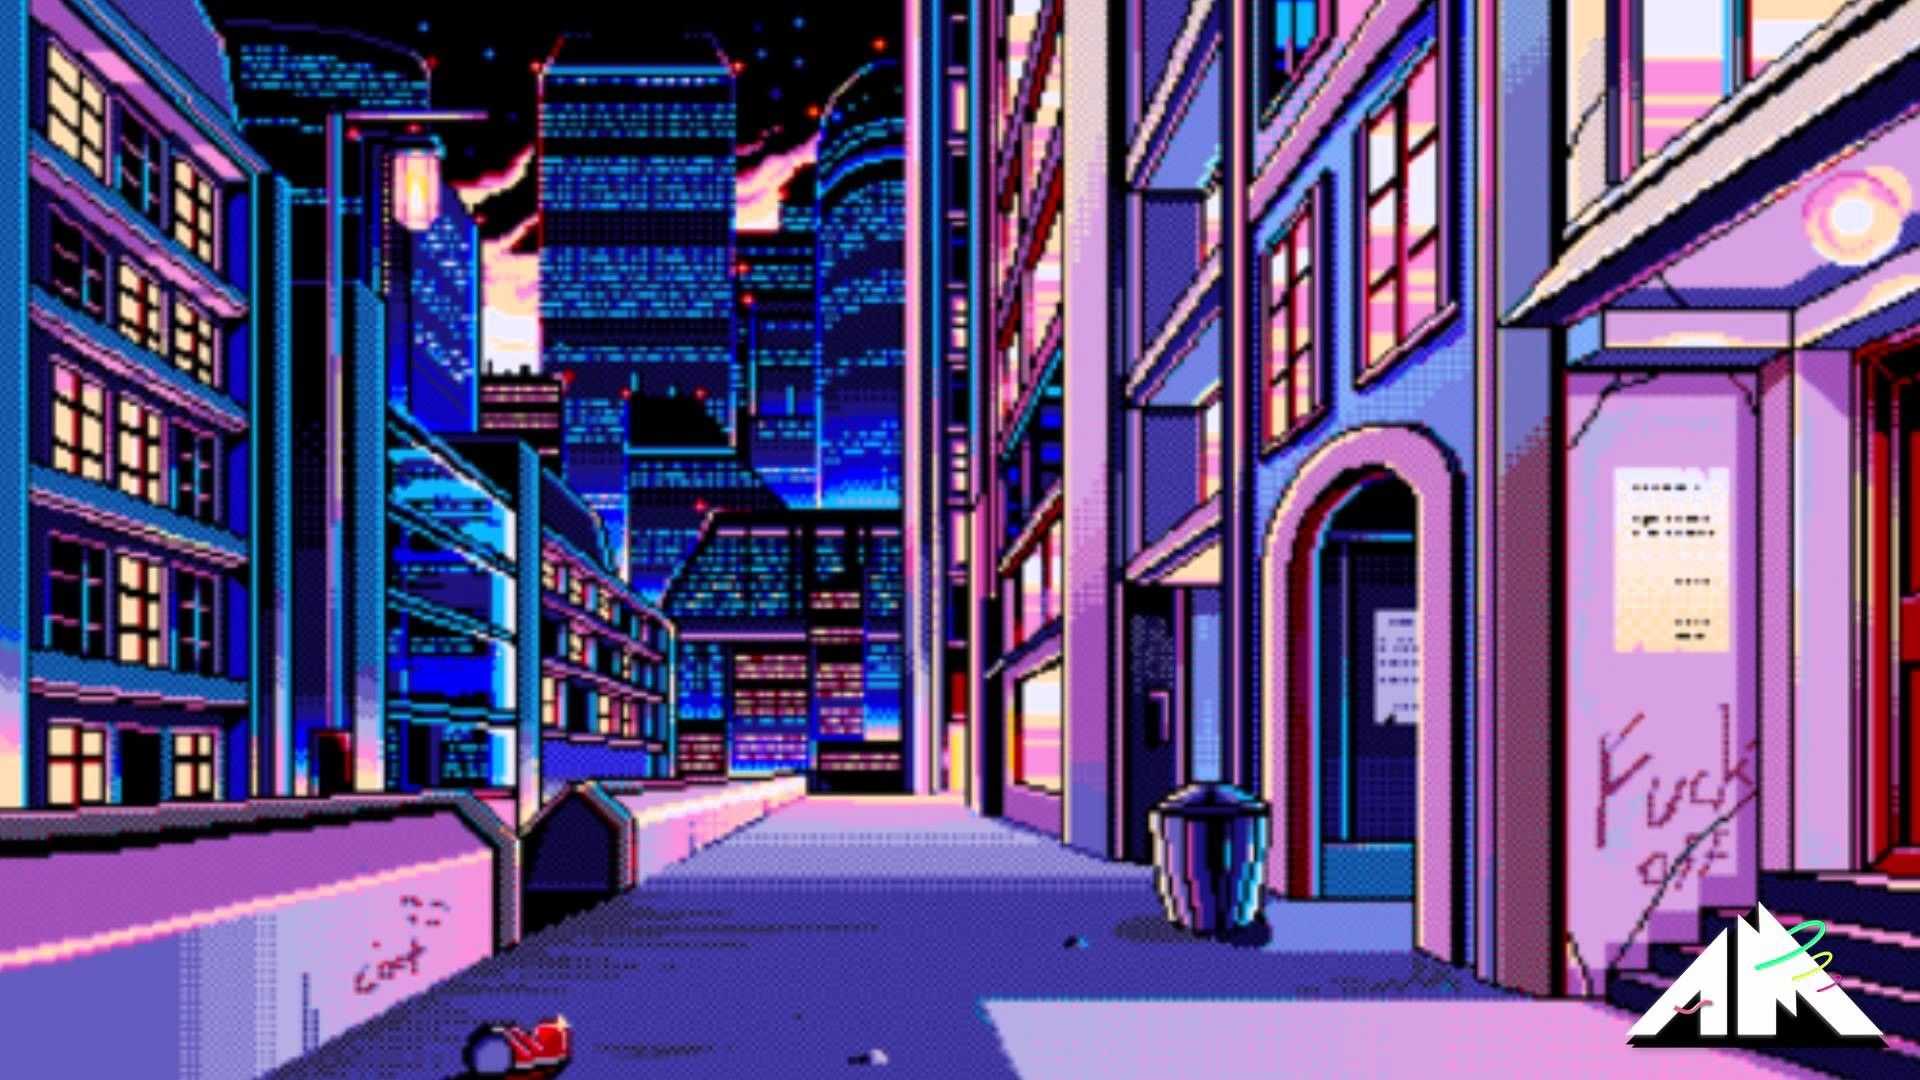 A pixel art image of a street at night with a car and a person walking - 1920x1080, vaporwave, pixel art, anime, architecture